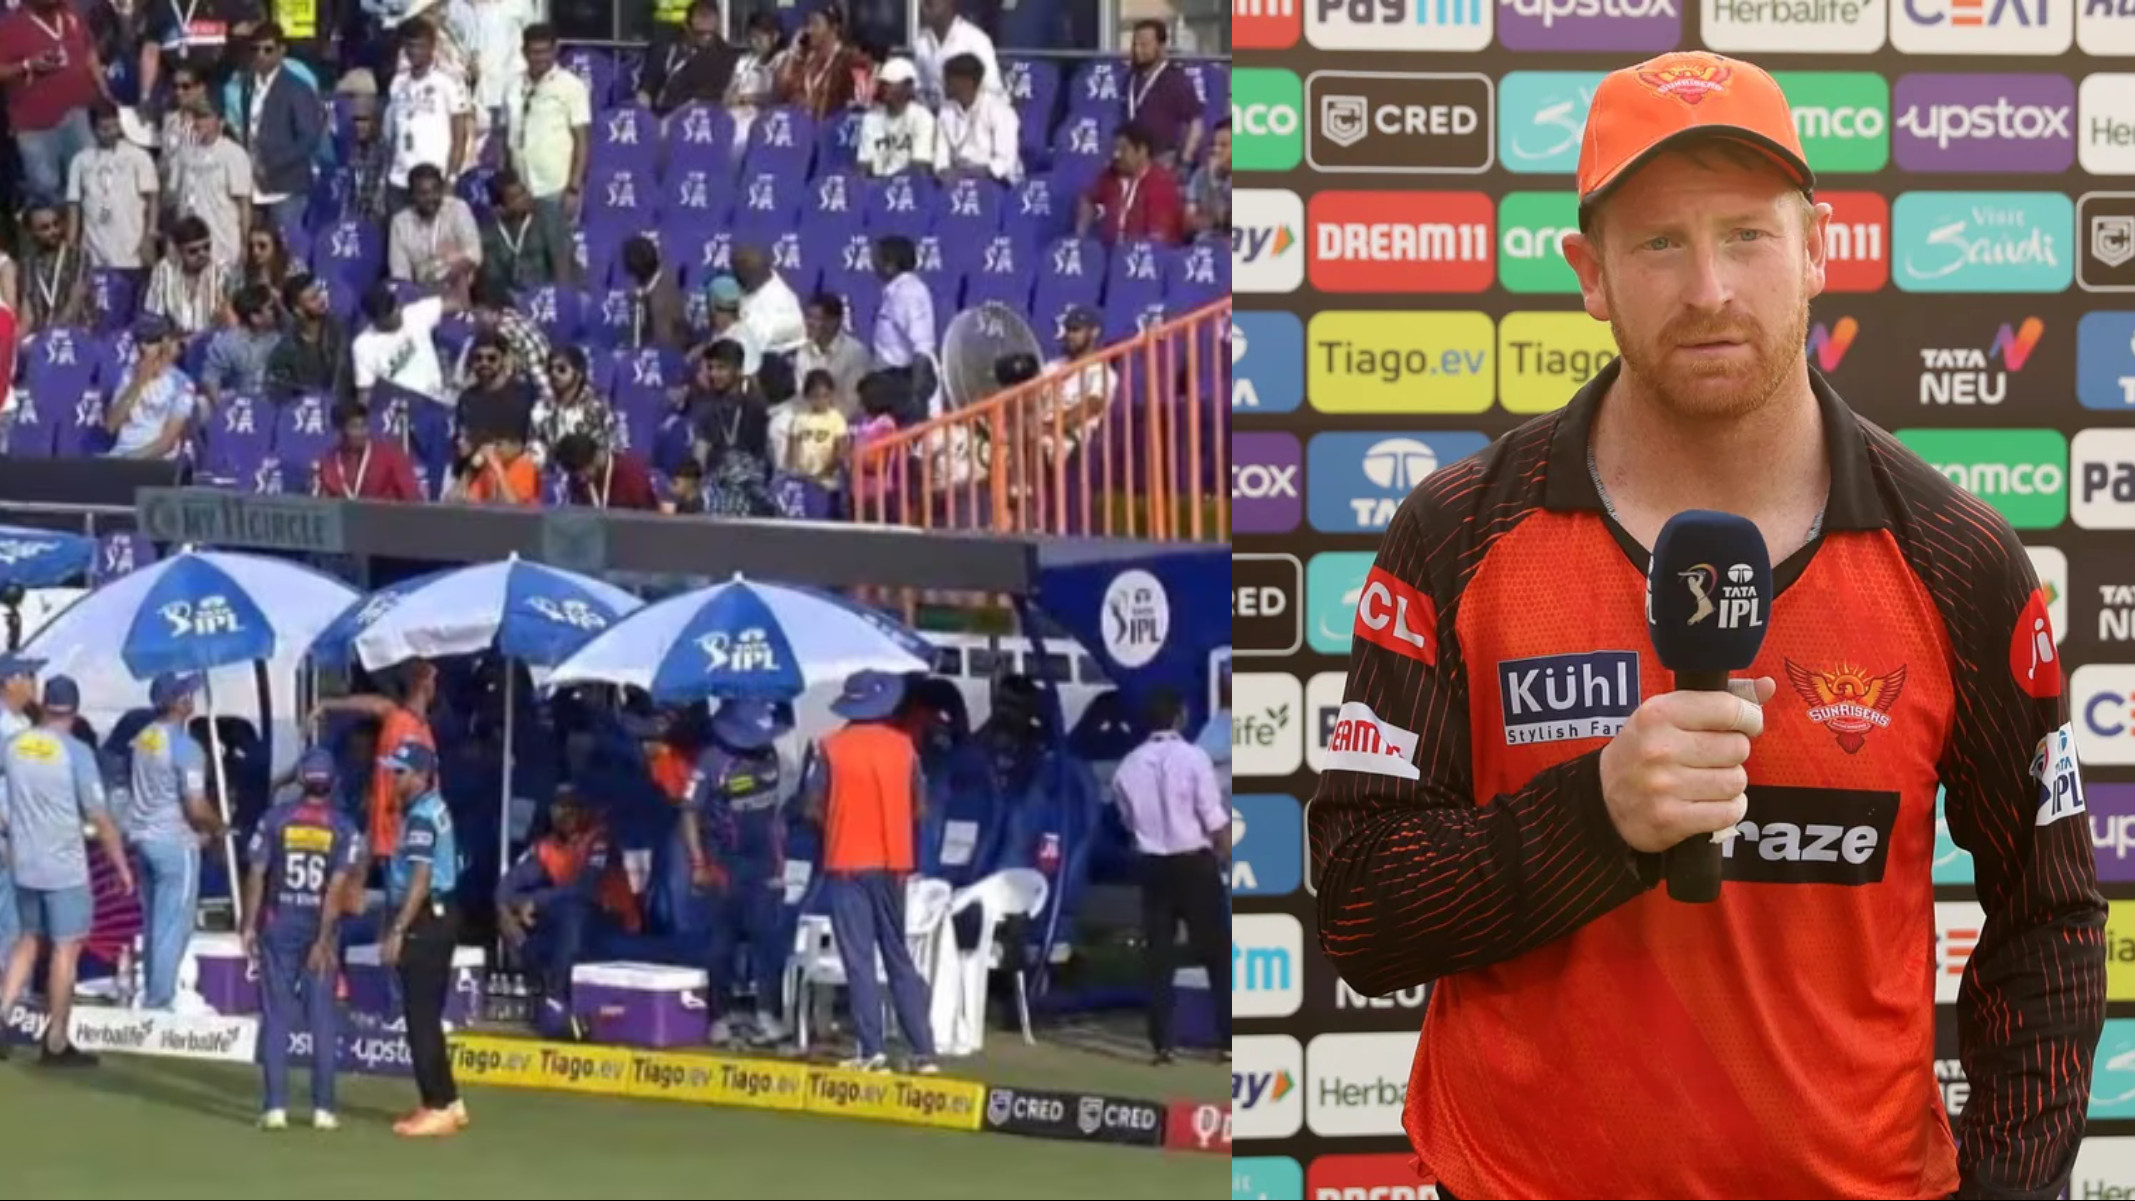 IPL 2023: “Disappointed with the crowd and their behavior”- Heinrich Klaasen on disruption in play; slams TV umpire's decision